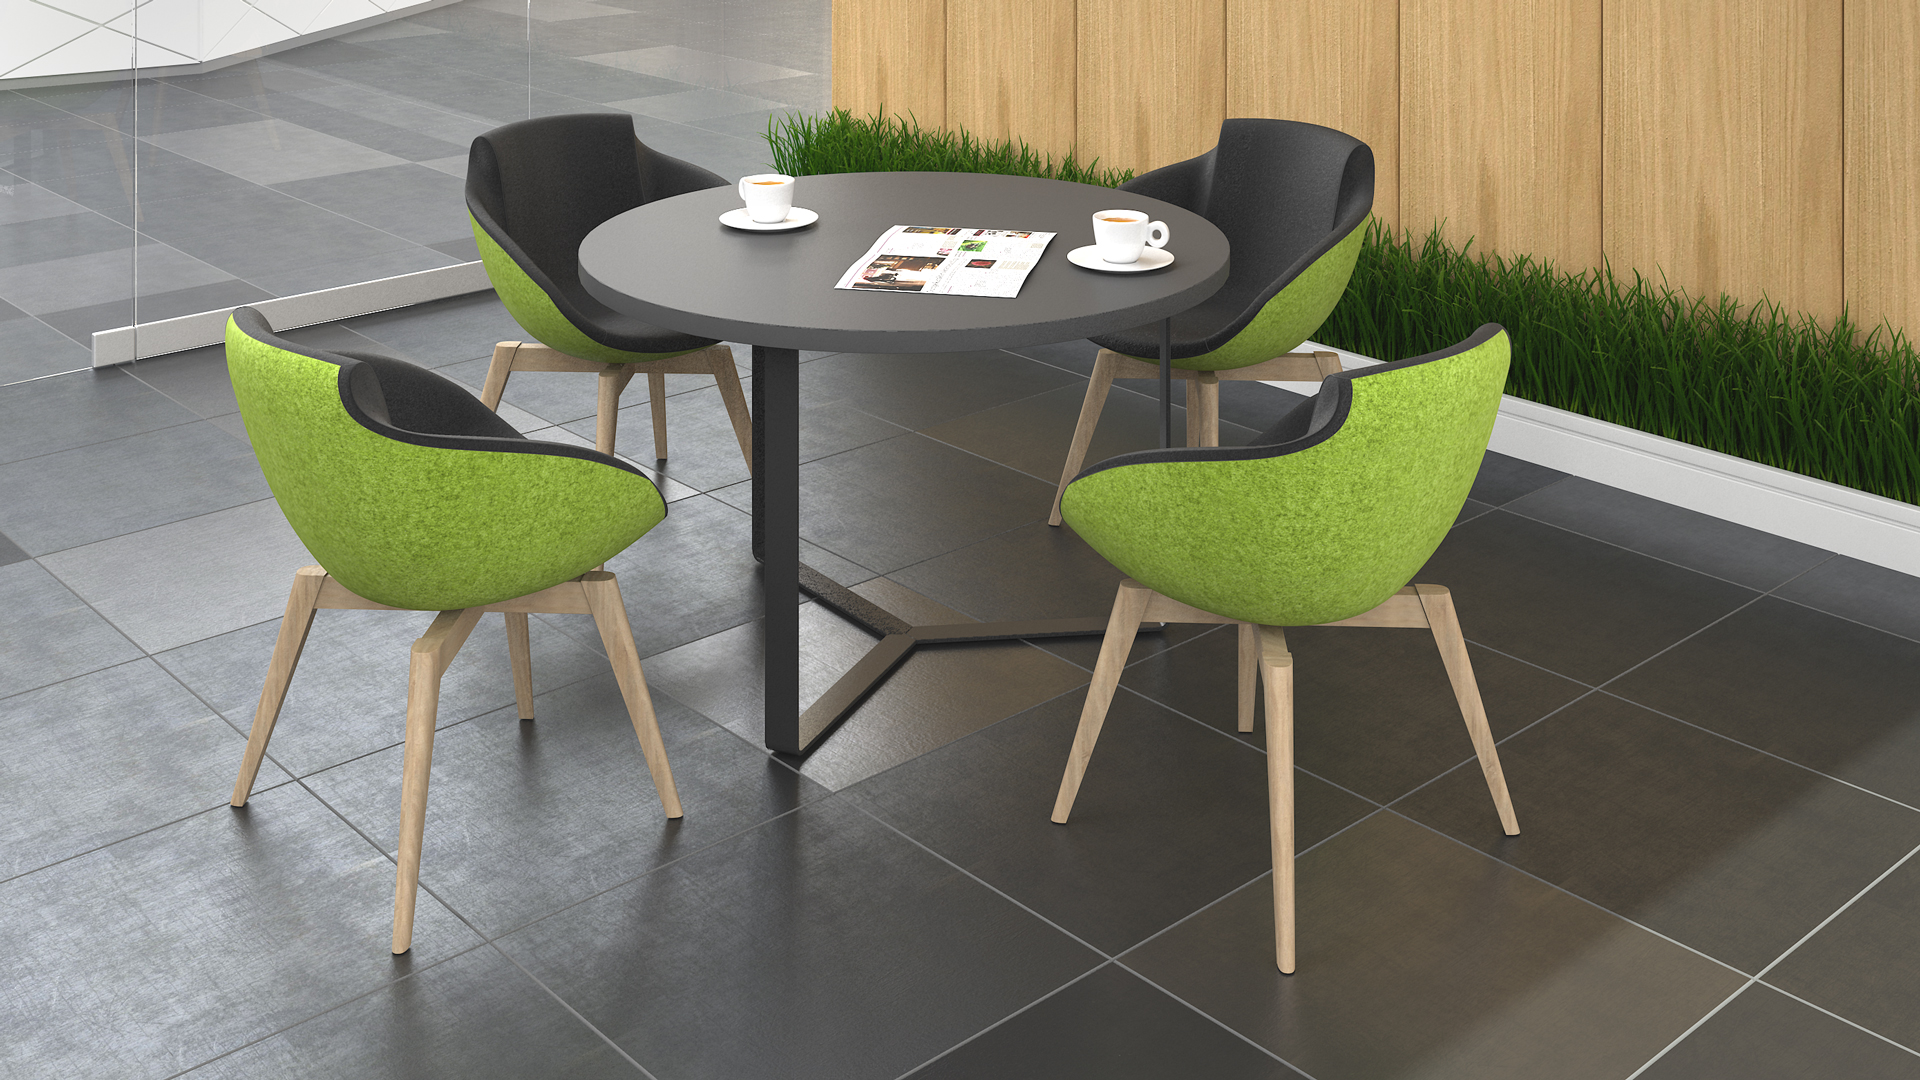 Plana round meeting table in black with Tula lounge chairs